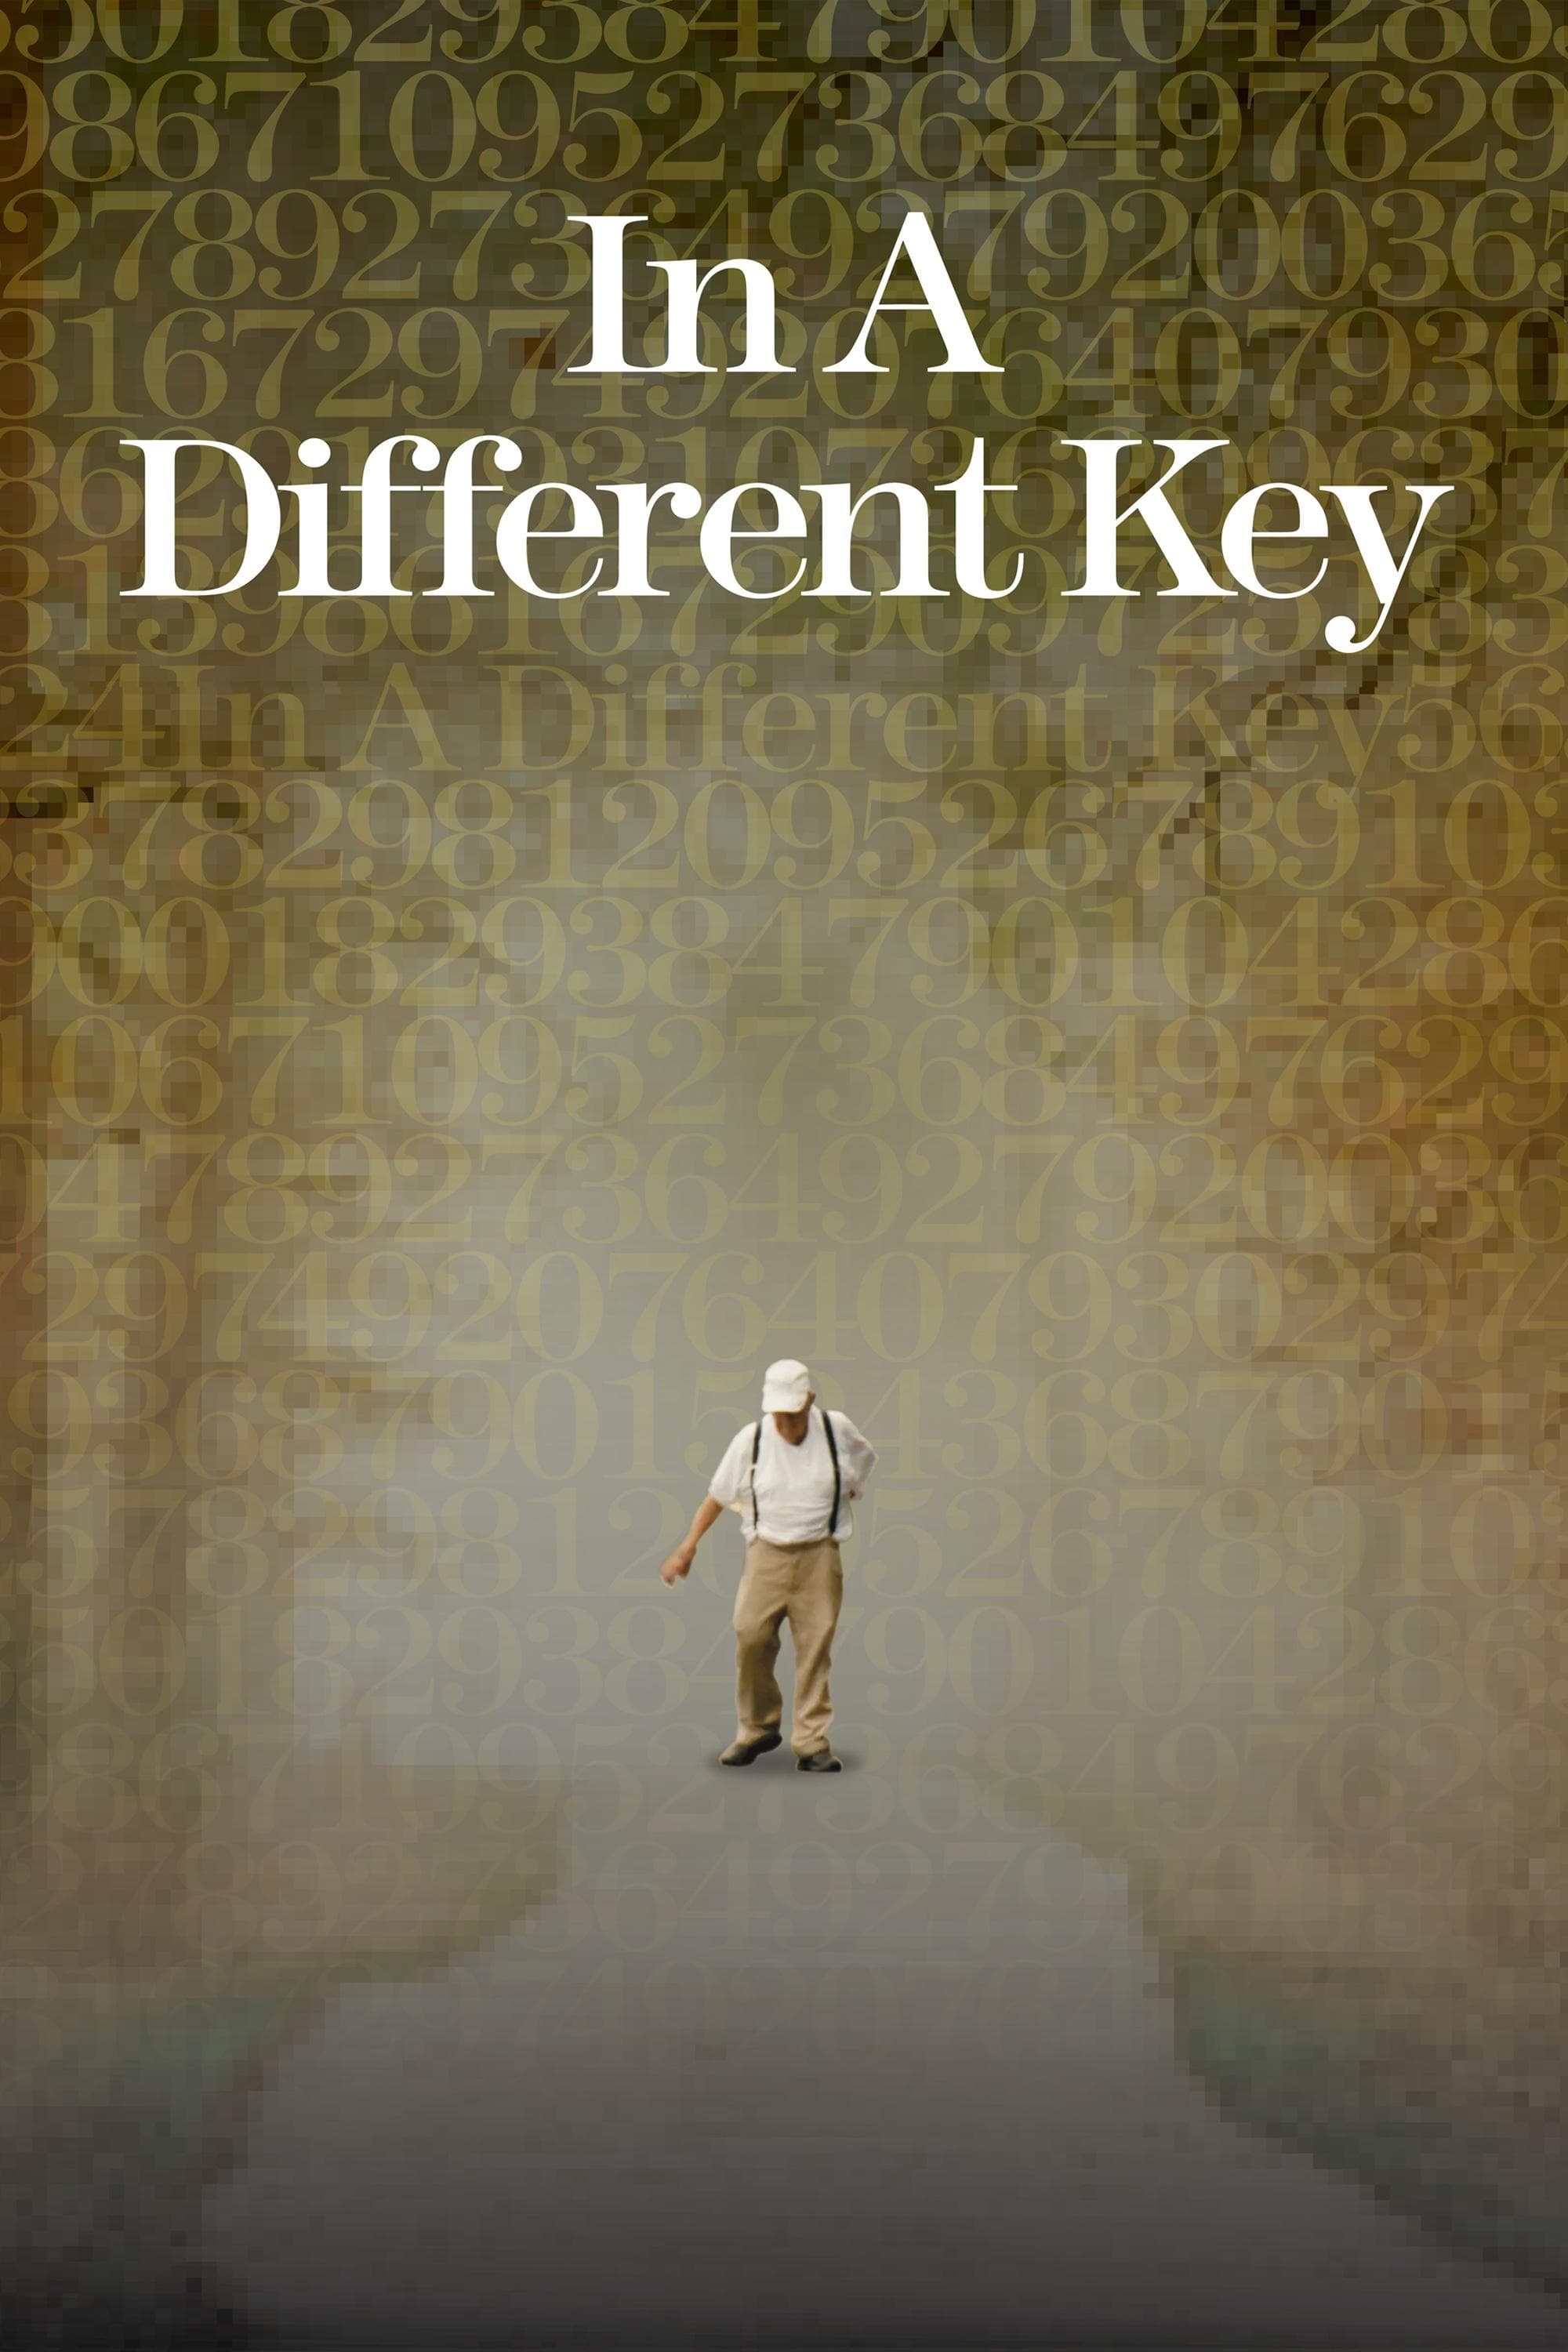 In a Different Key